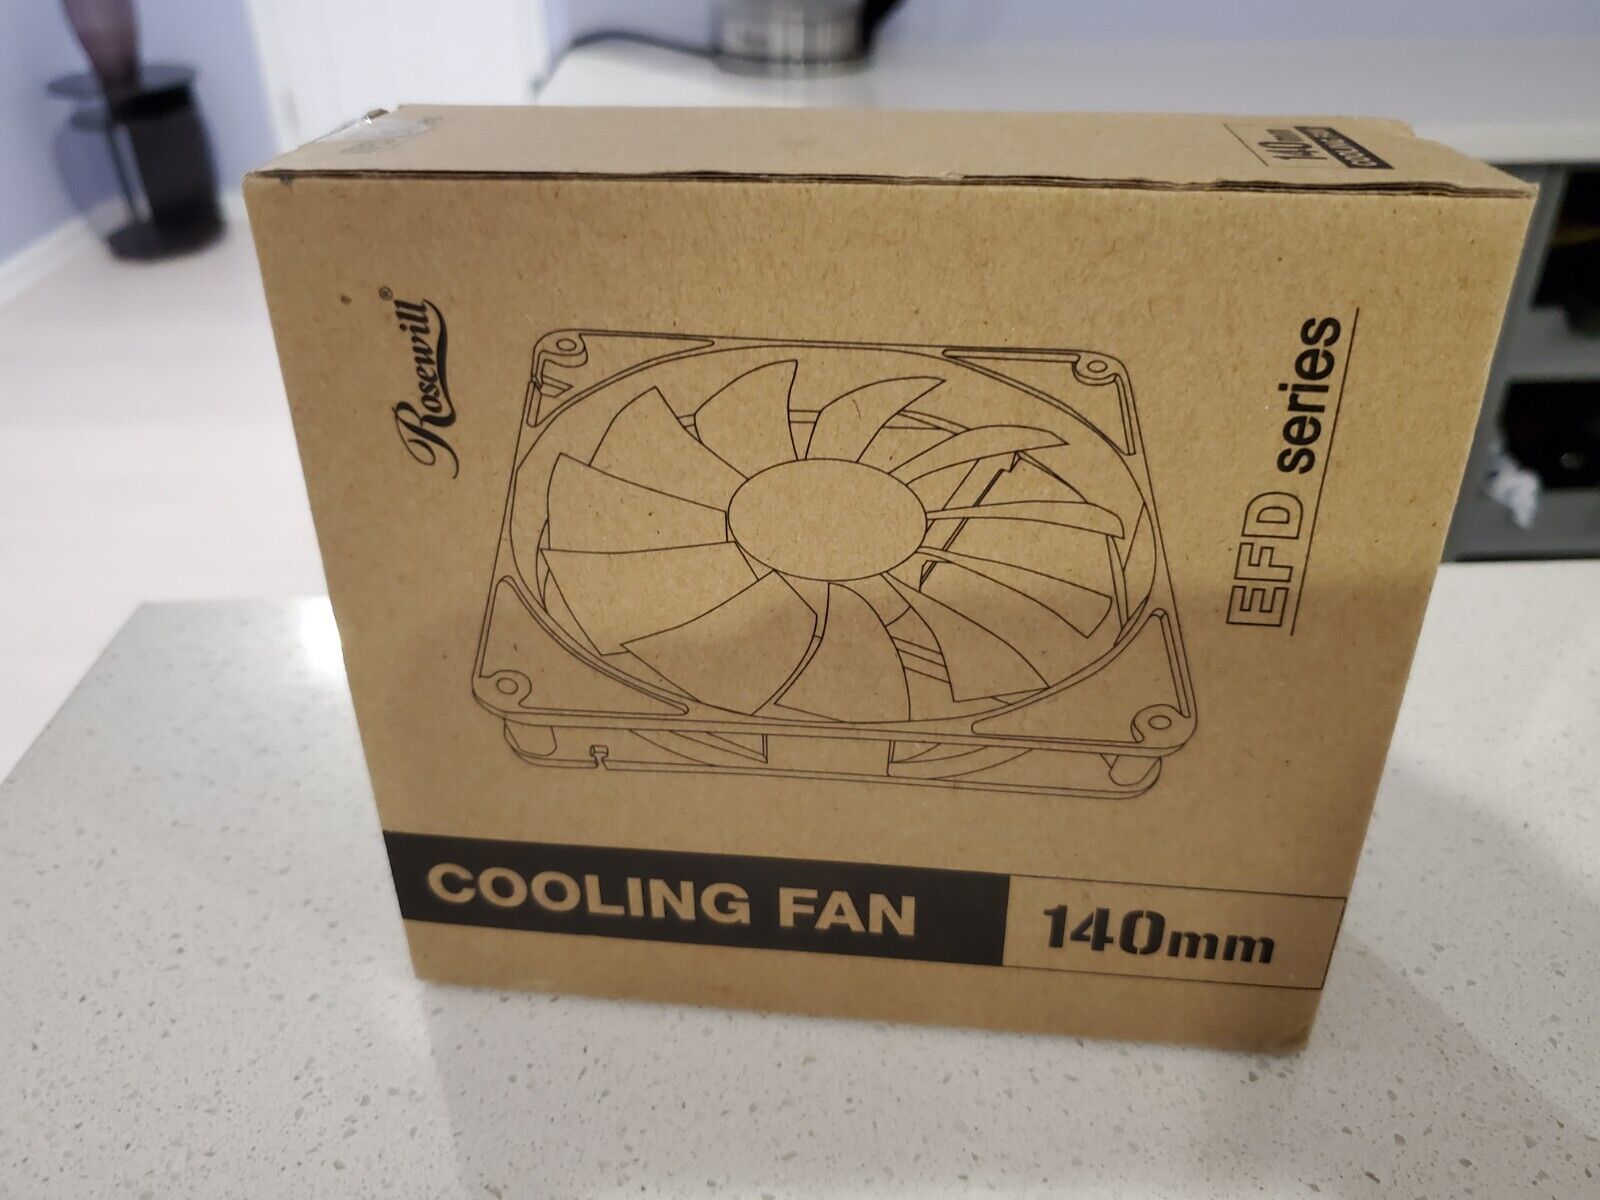 Brand new Rosewill EFD series cooling fan 140mm